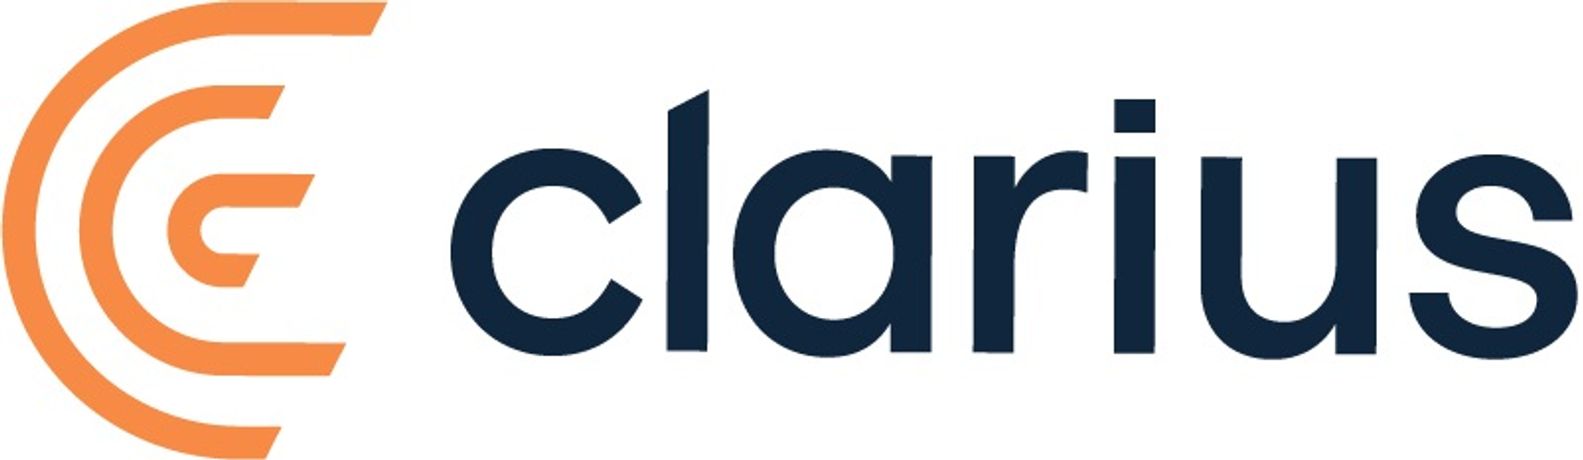 Clarius - Version L7 & L15 - Software for Advanced Breast Package